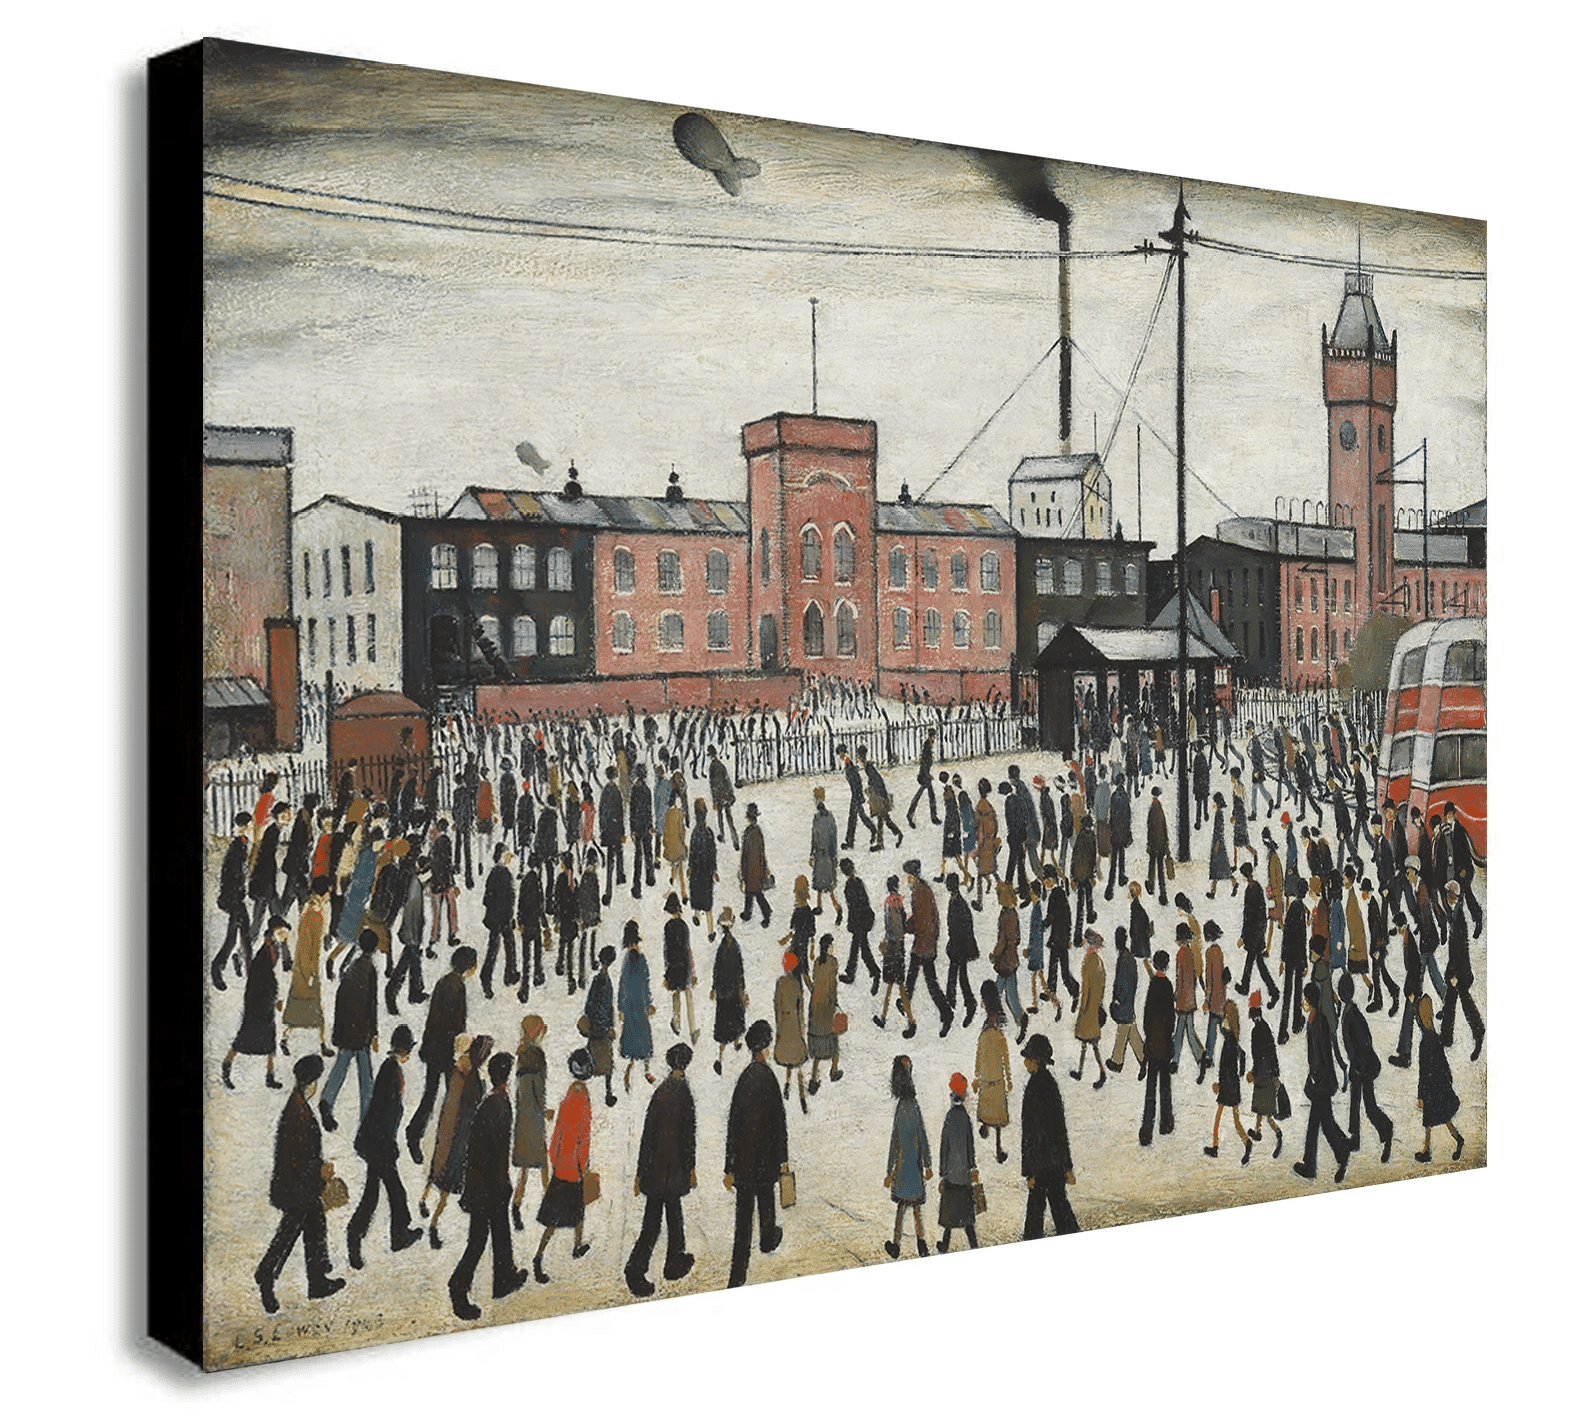 Ls Lowry Going to Work CANVAS WALL ART PRINT ARTWORK PAINTING PICTURE FRAMED 